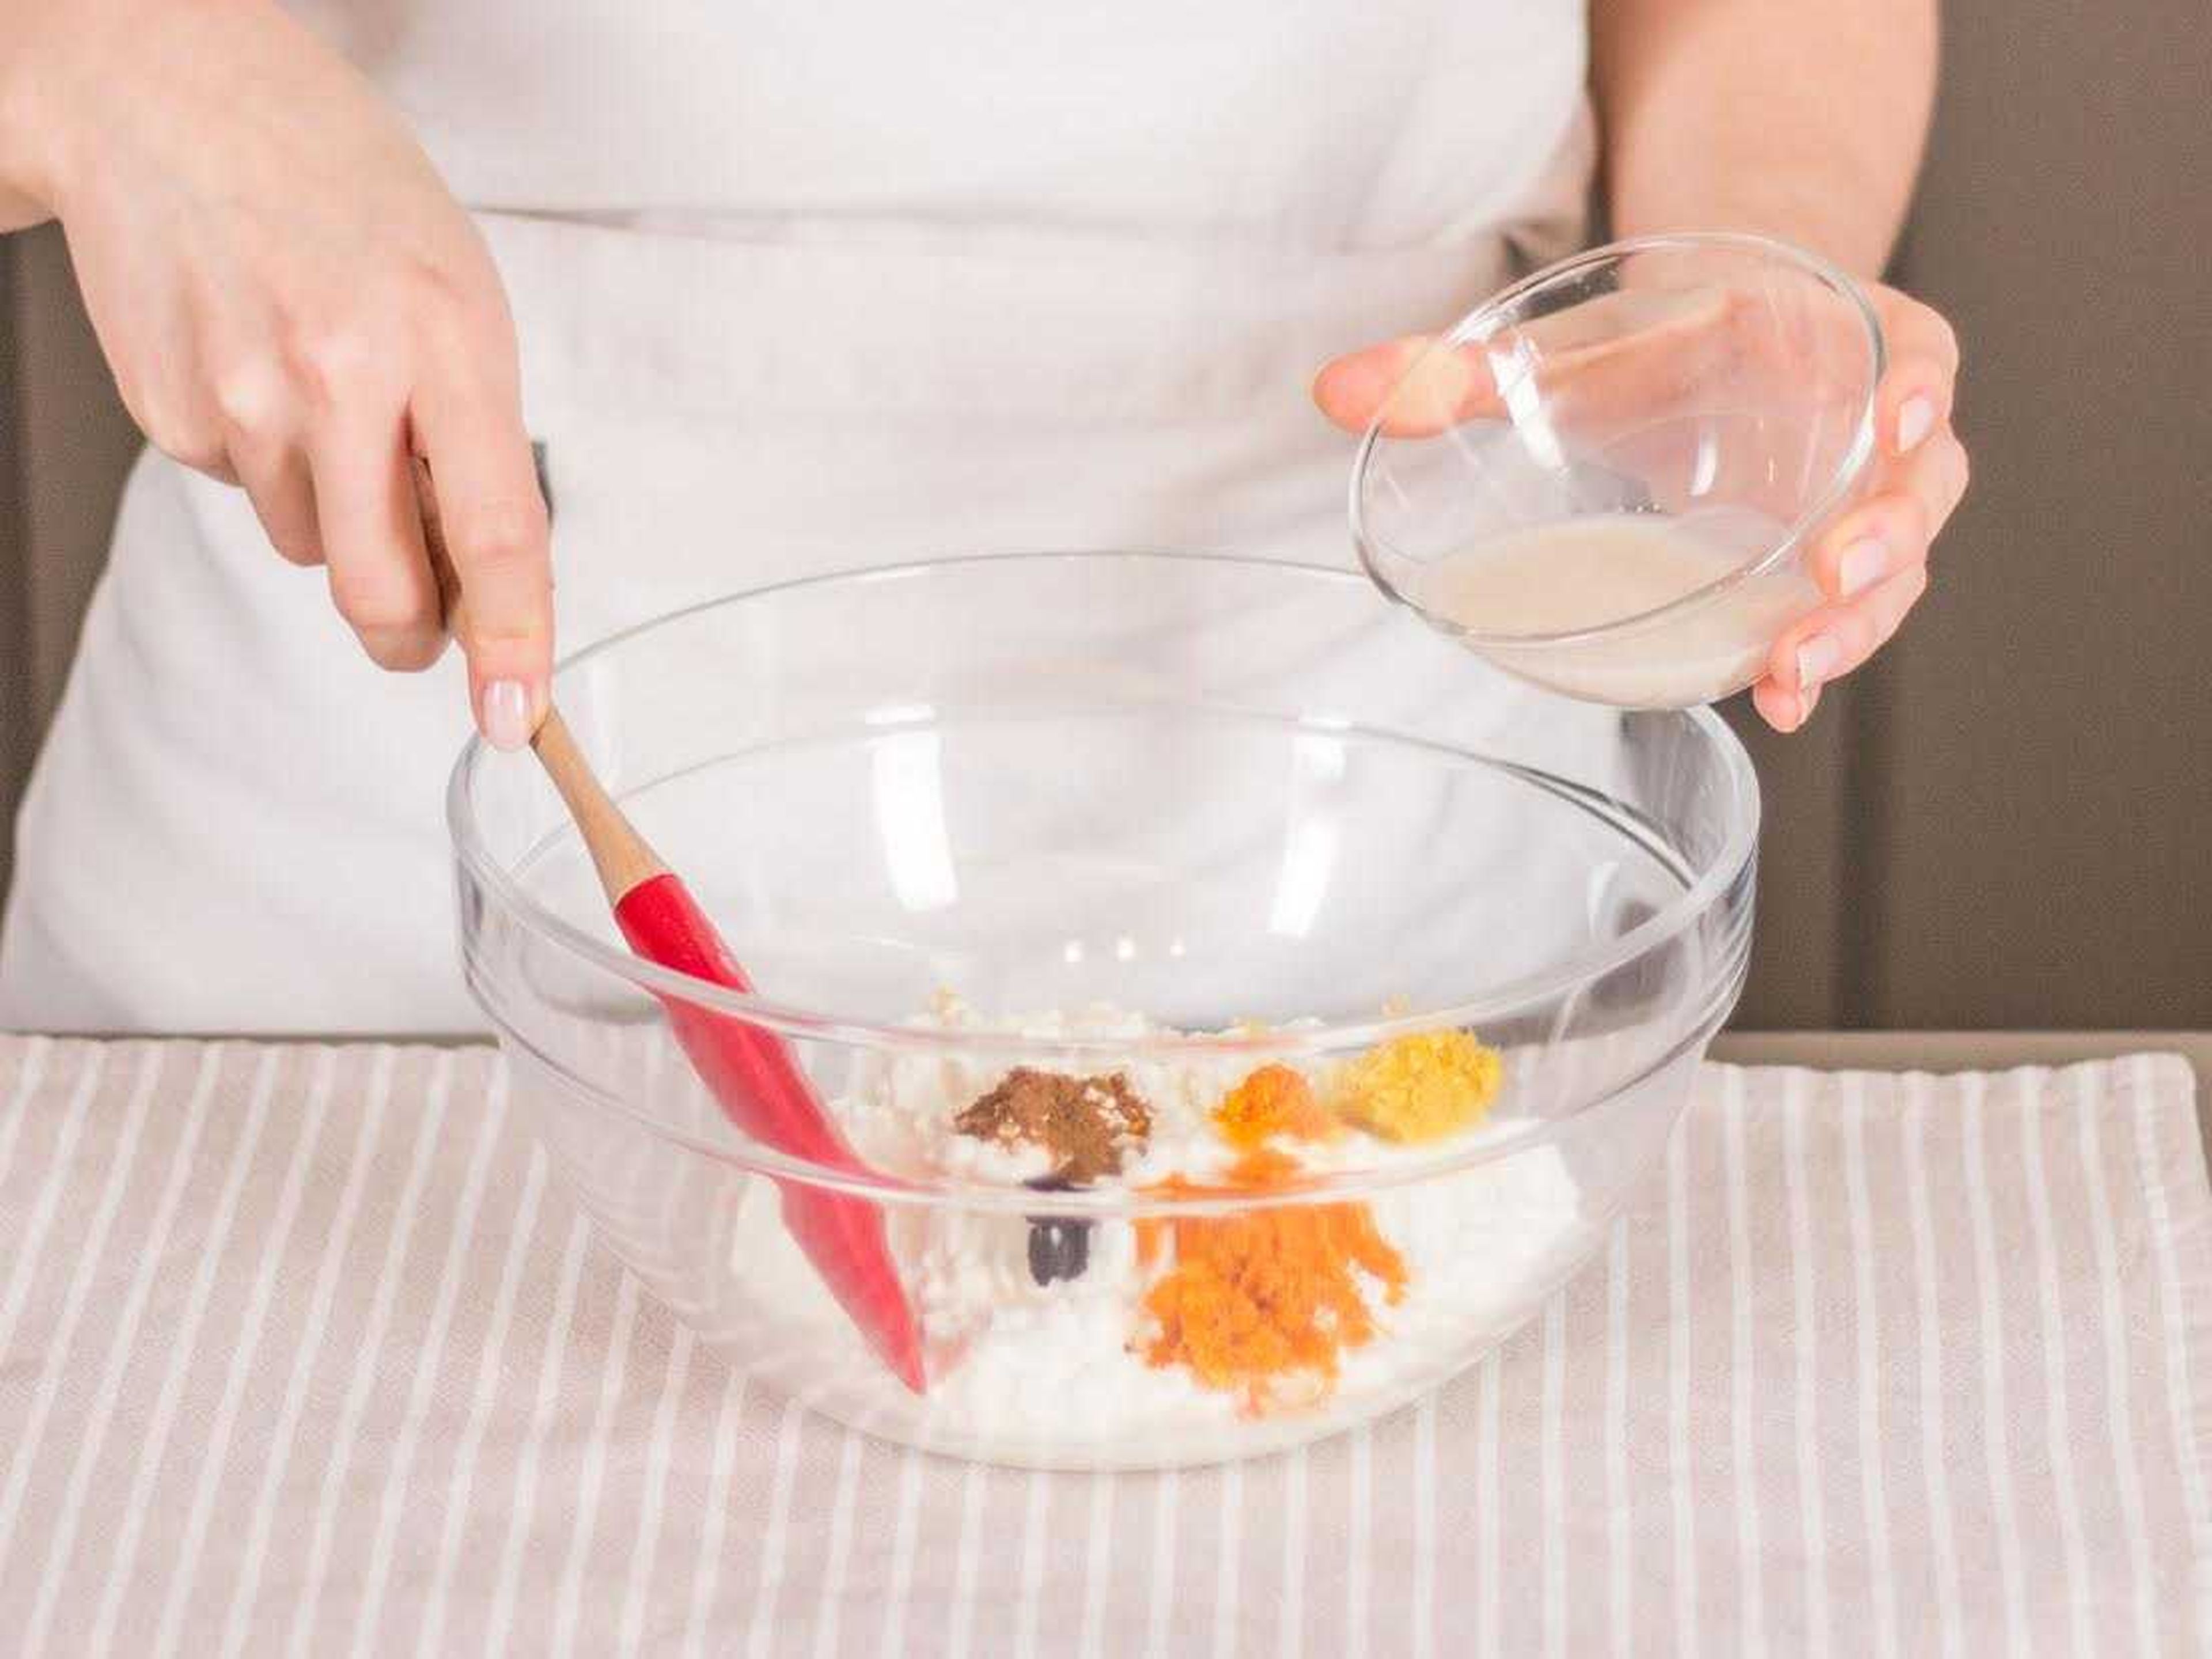 Add almond milk to a small bowl and set aside. In a large bowl, combine cotton cheese, vanilla, orange zest, lemon zest, and cinnamon and mix until combined. Add almond milk, adding more if necessary to reach desired texture. Sweeten the rice pudding with stevia. Transfer bowl to refrigerator and let rest for approx. 30 min.